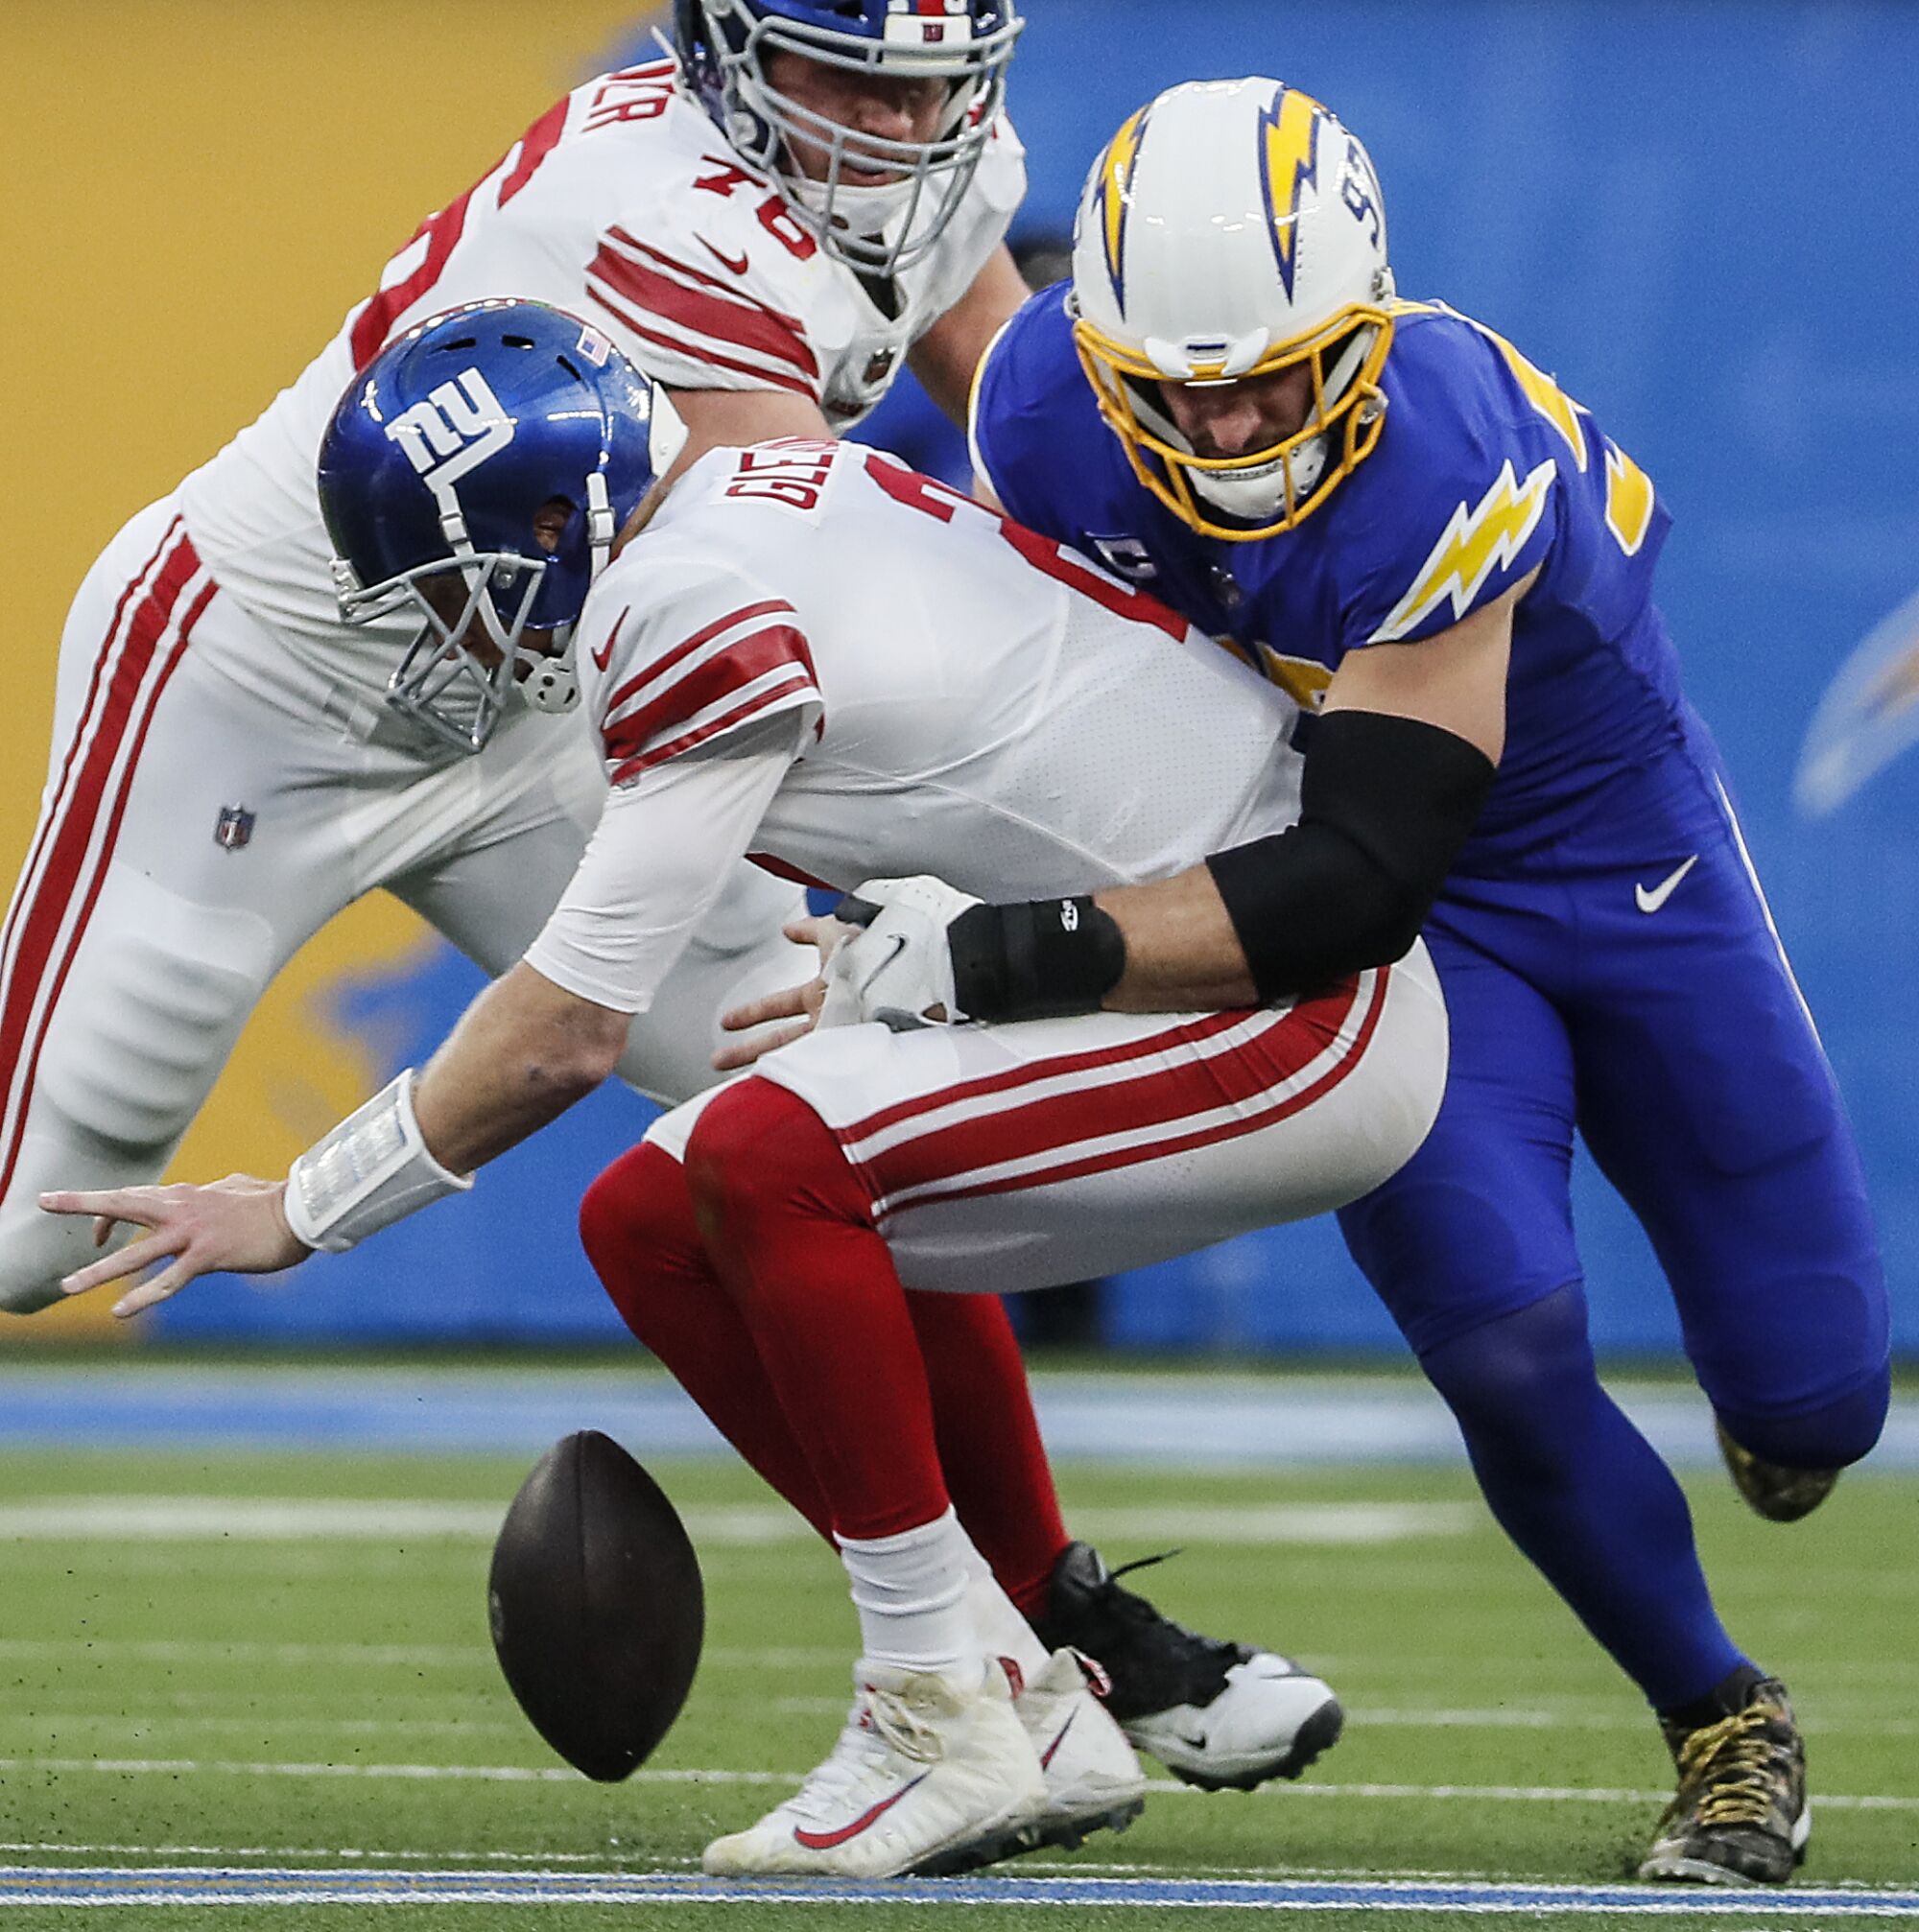 Chargers defensive end Joey Bosa, right, knocks the ball from New York Giants quarterback Mike Glennon.